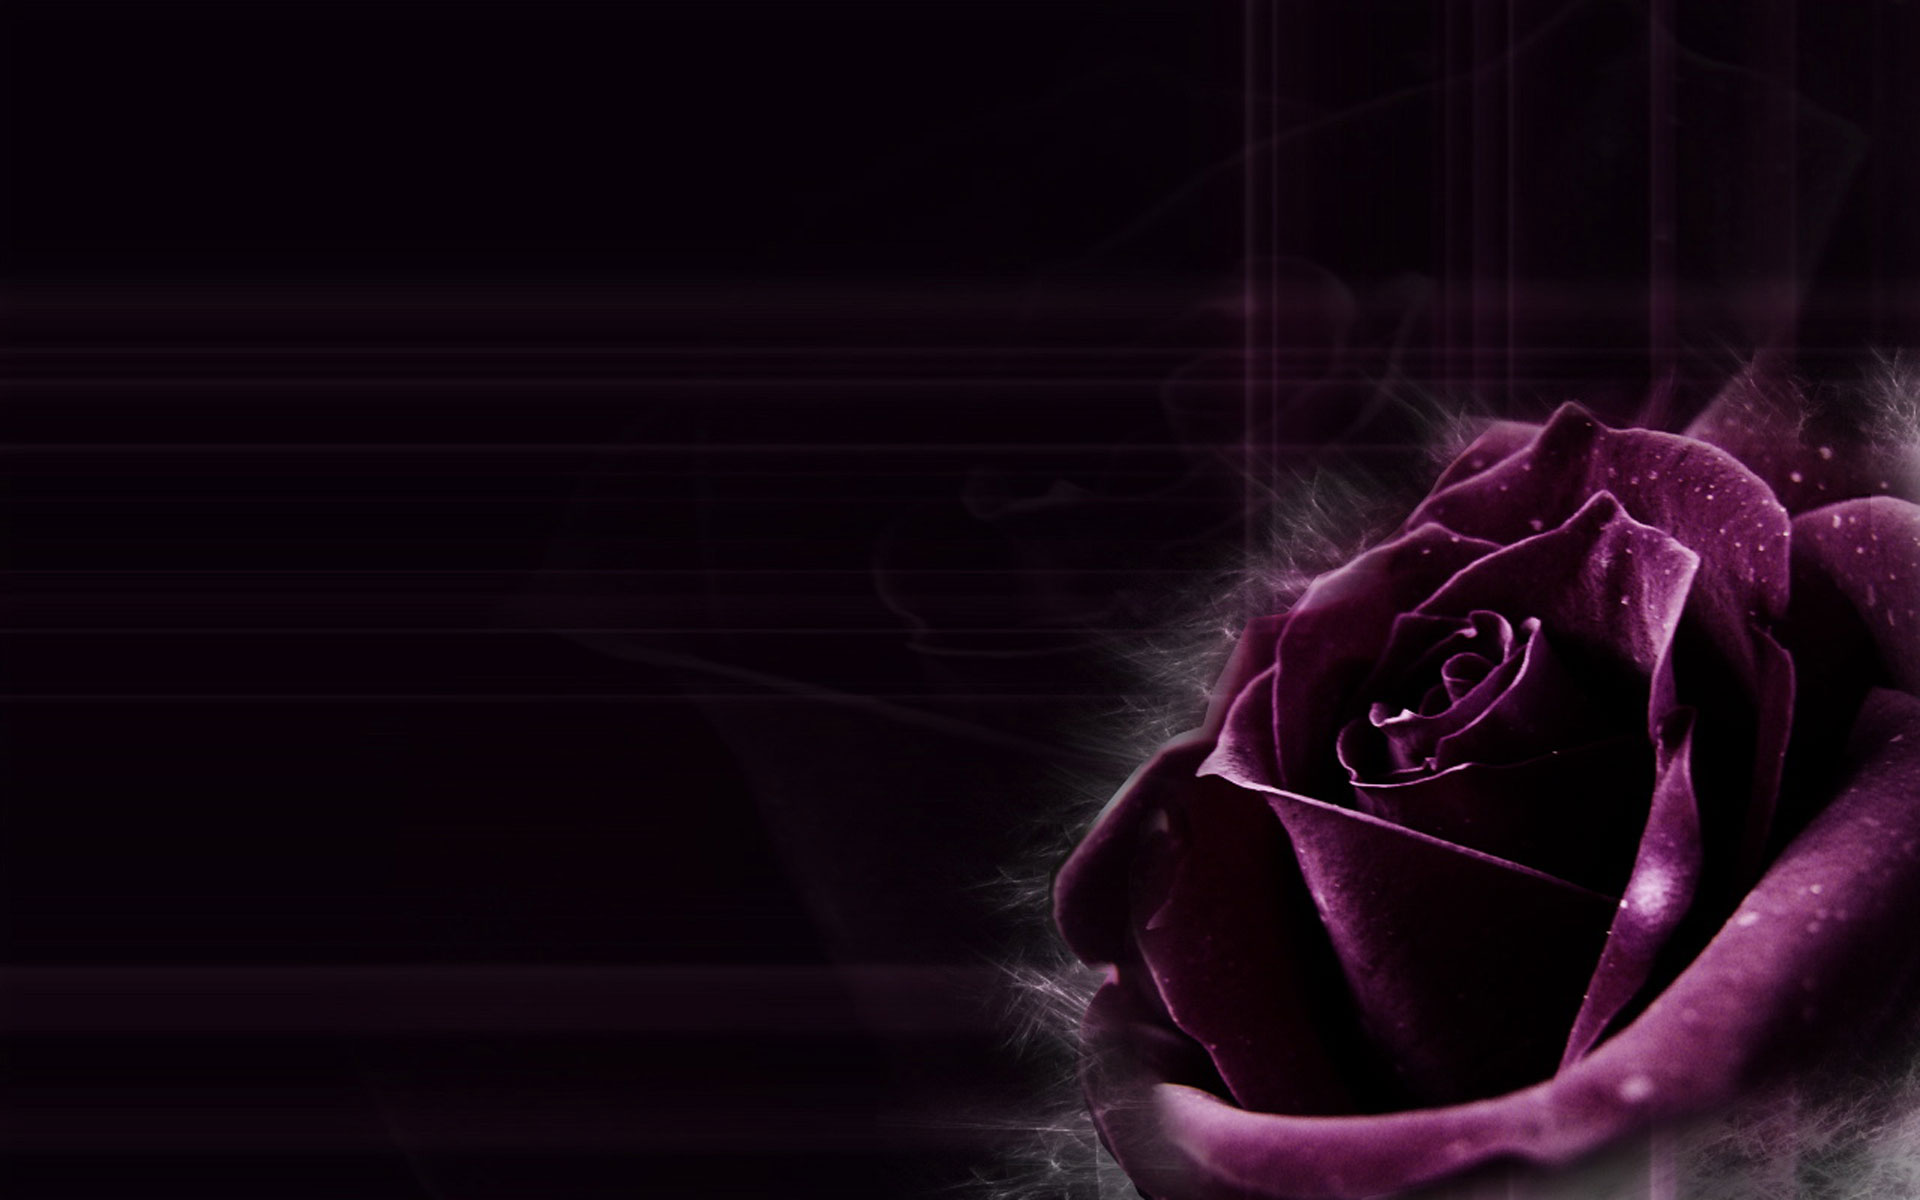 Dark Purple Rose Backgrounds Images Pictures   Becuo 1920x1200